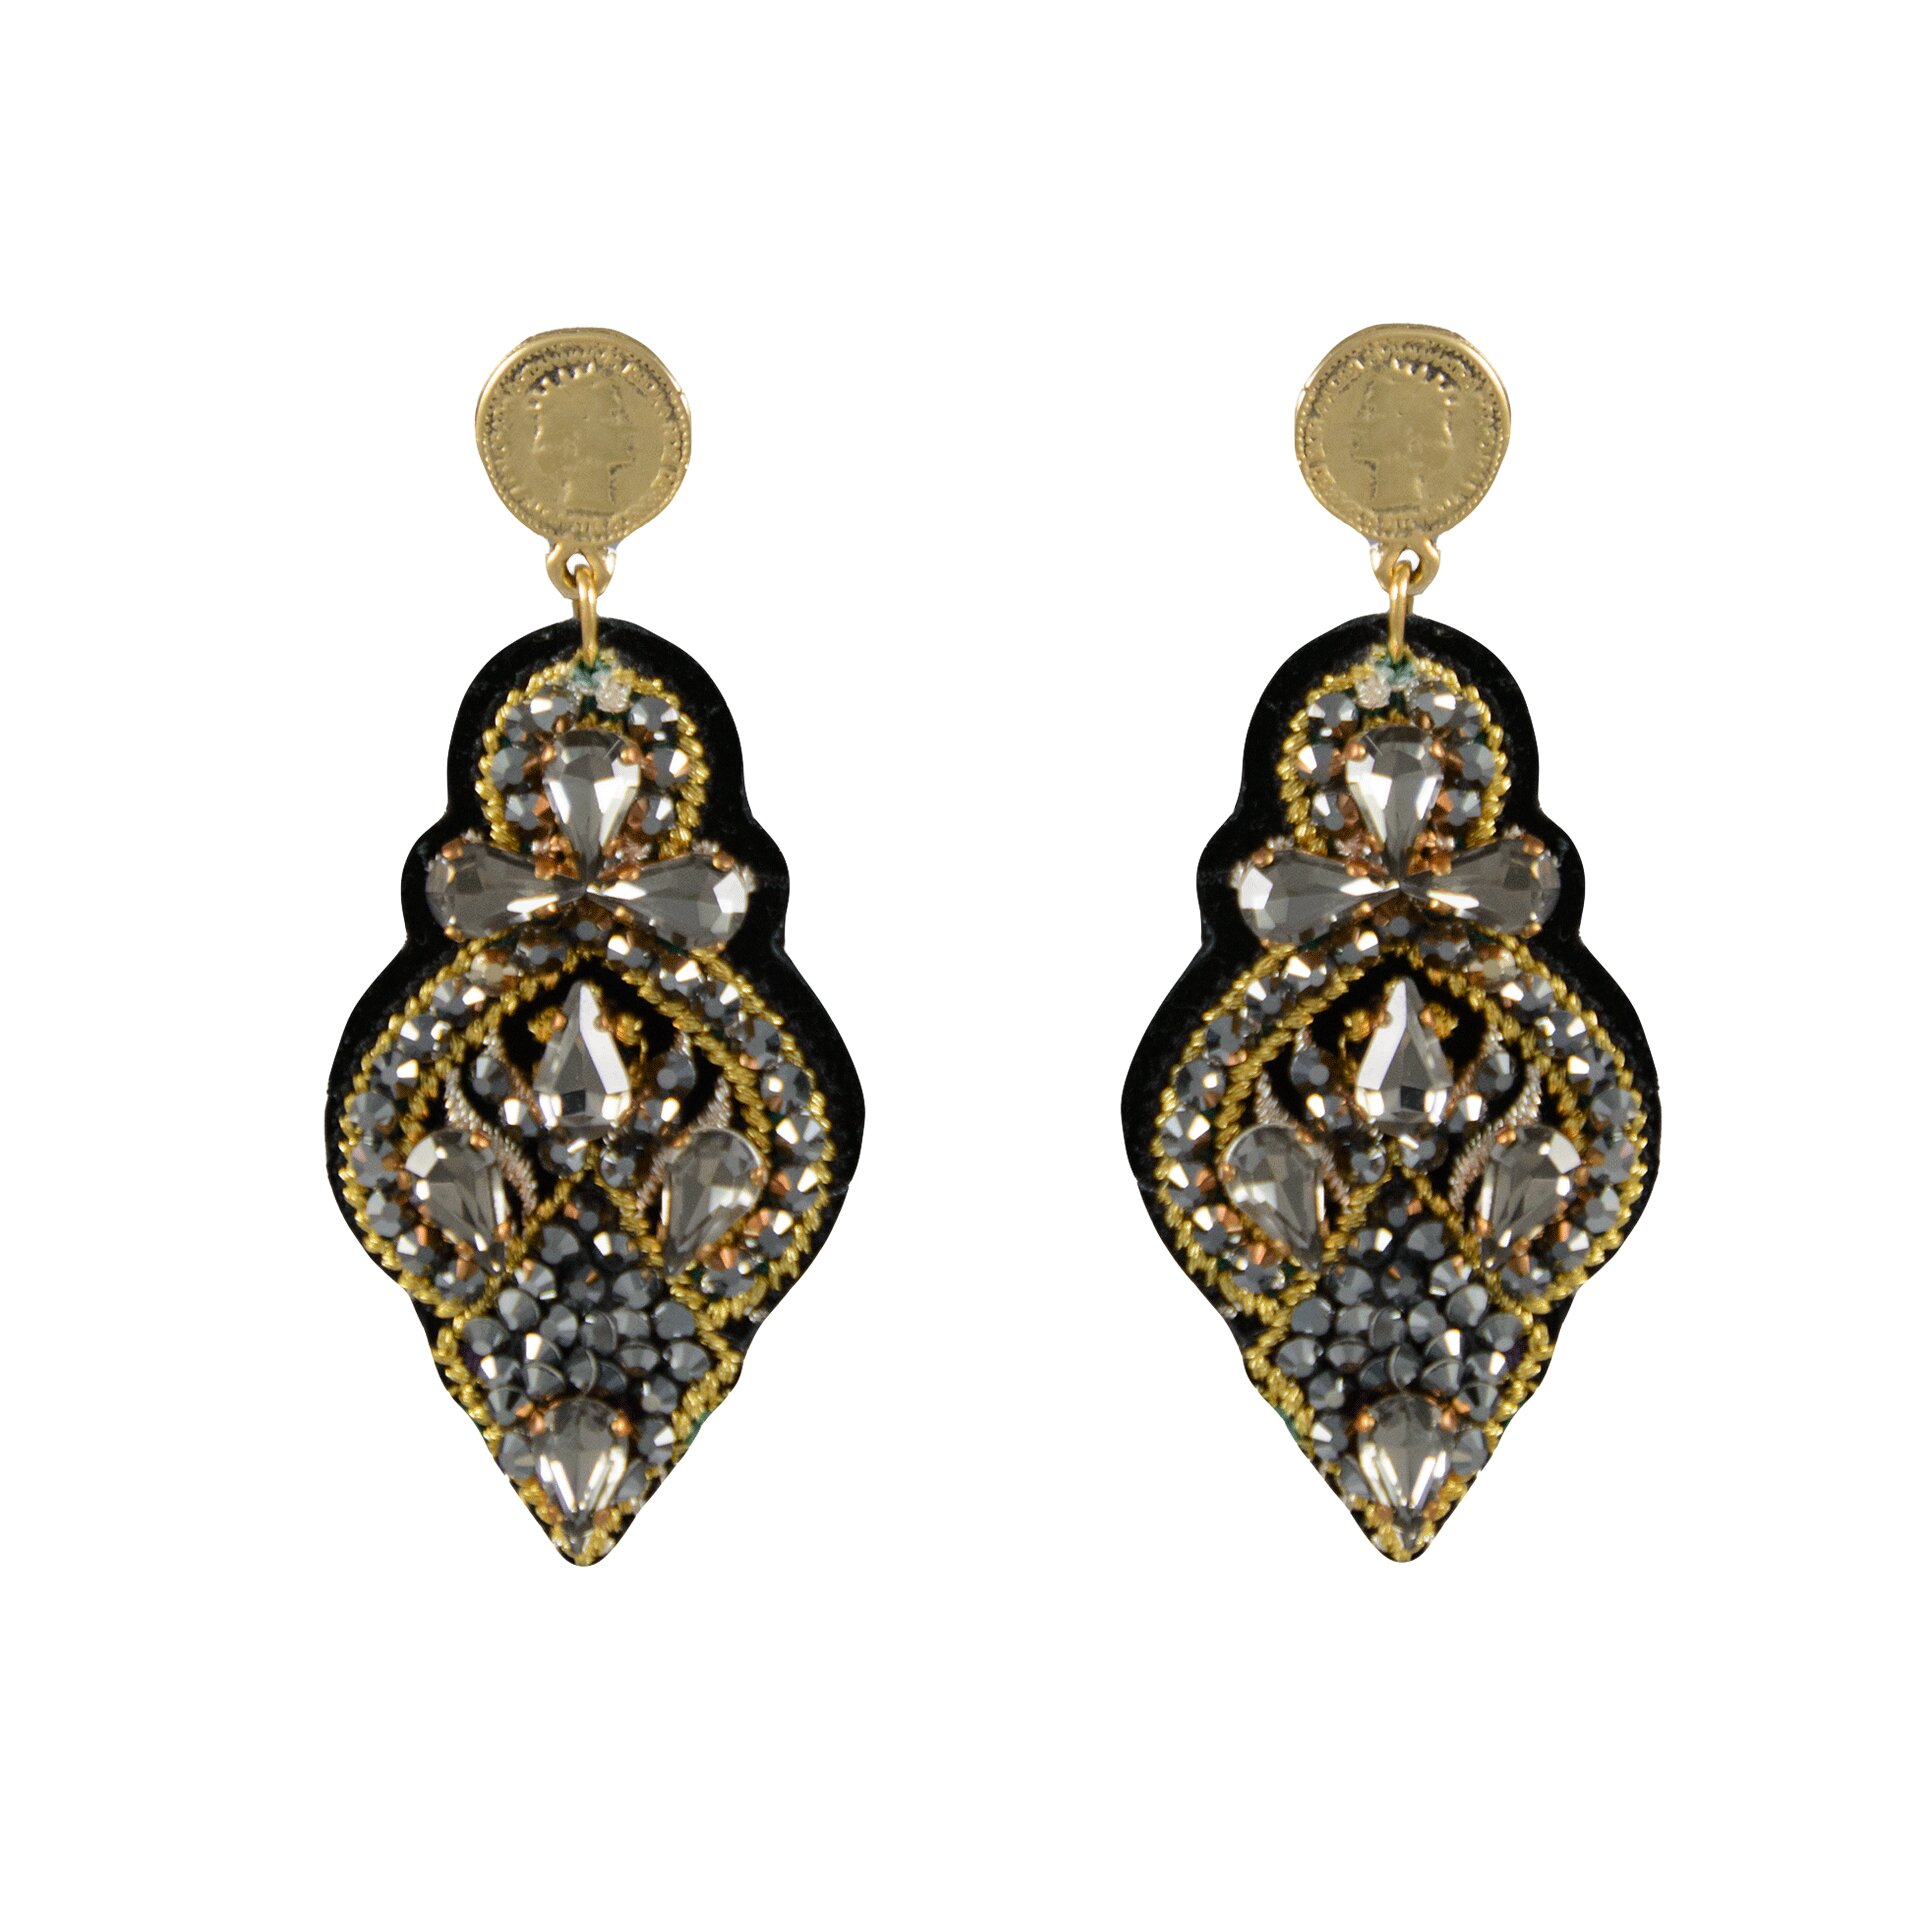 LINDA'S DREAM gray earrings with gold elements